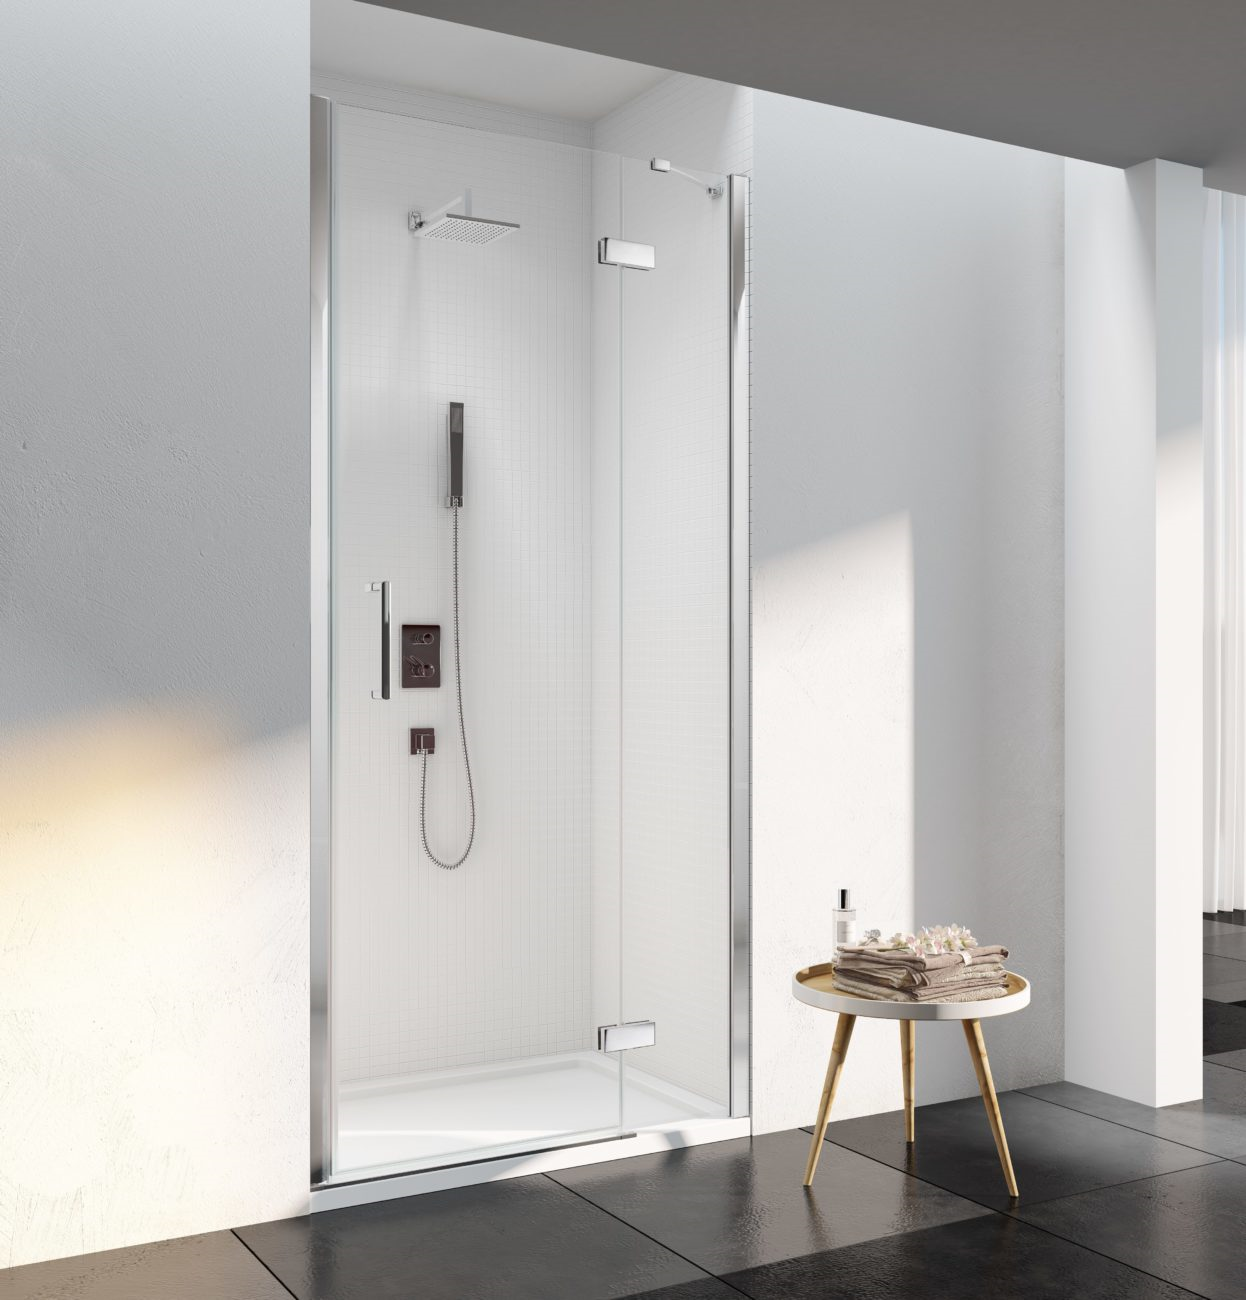 MERLYN S6F1200RECH Series 6 Framless Hinged Shower Door 1200mm with In-Line Panel for Recess Fitting